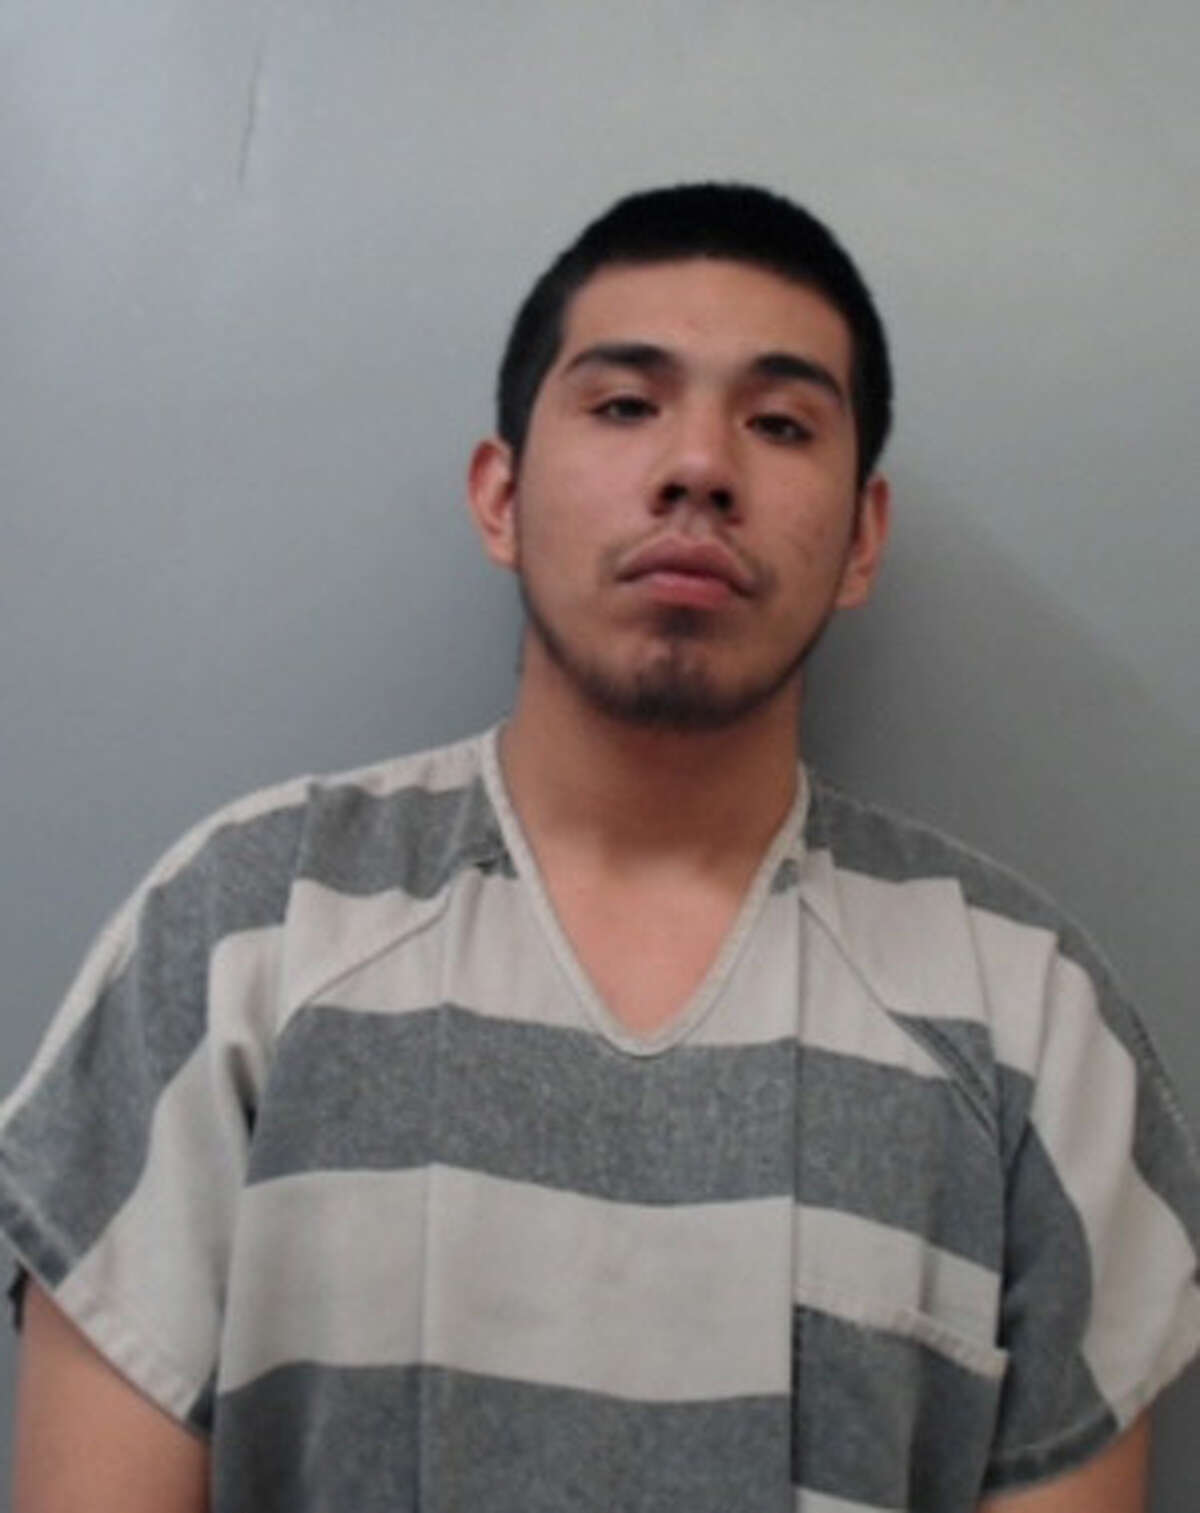 Omero Jaimes, 22, was charged with criminal mischief and theft.